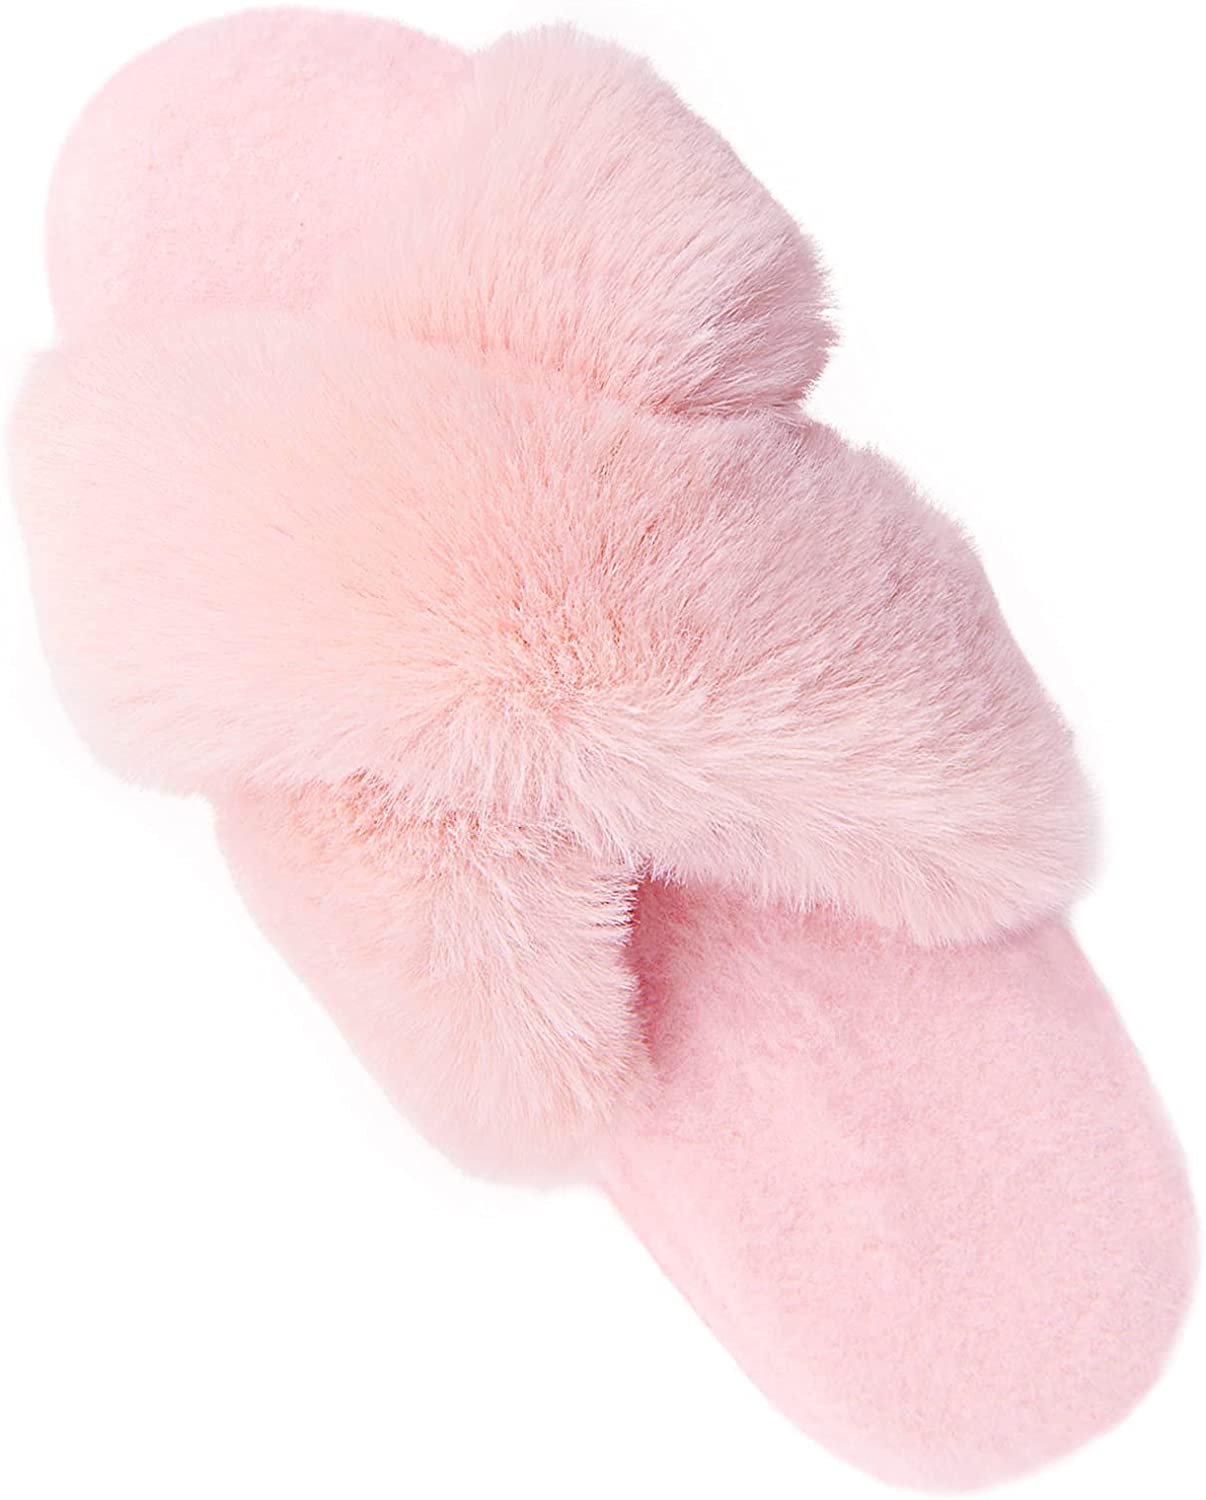 Personalized Fluffy Faux Fur Crossover Slippers - White, Pink, Grey or Black - Slippers - San Rocco Italia